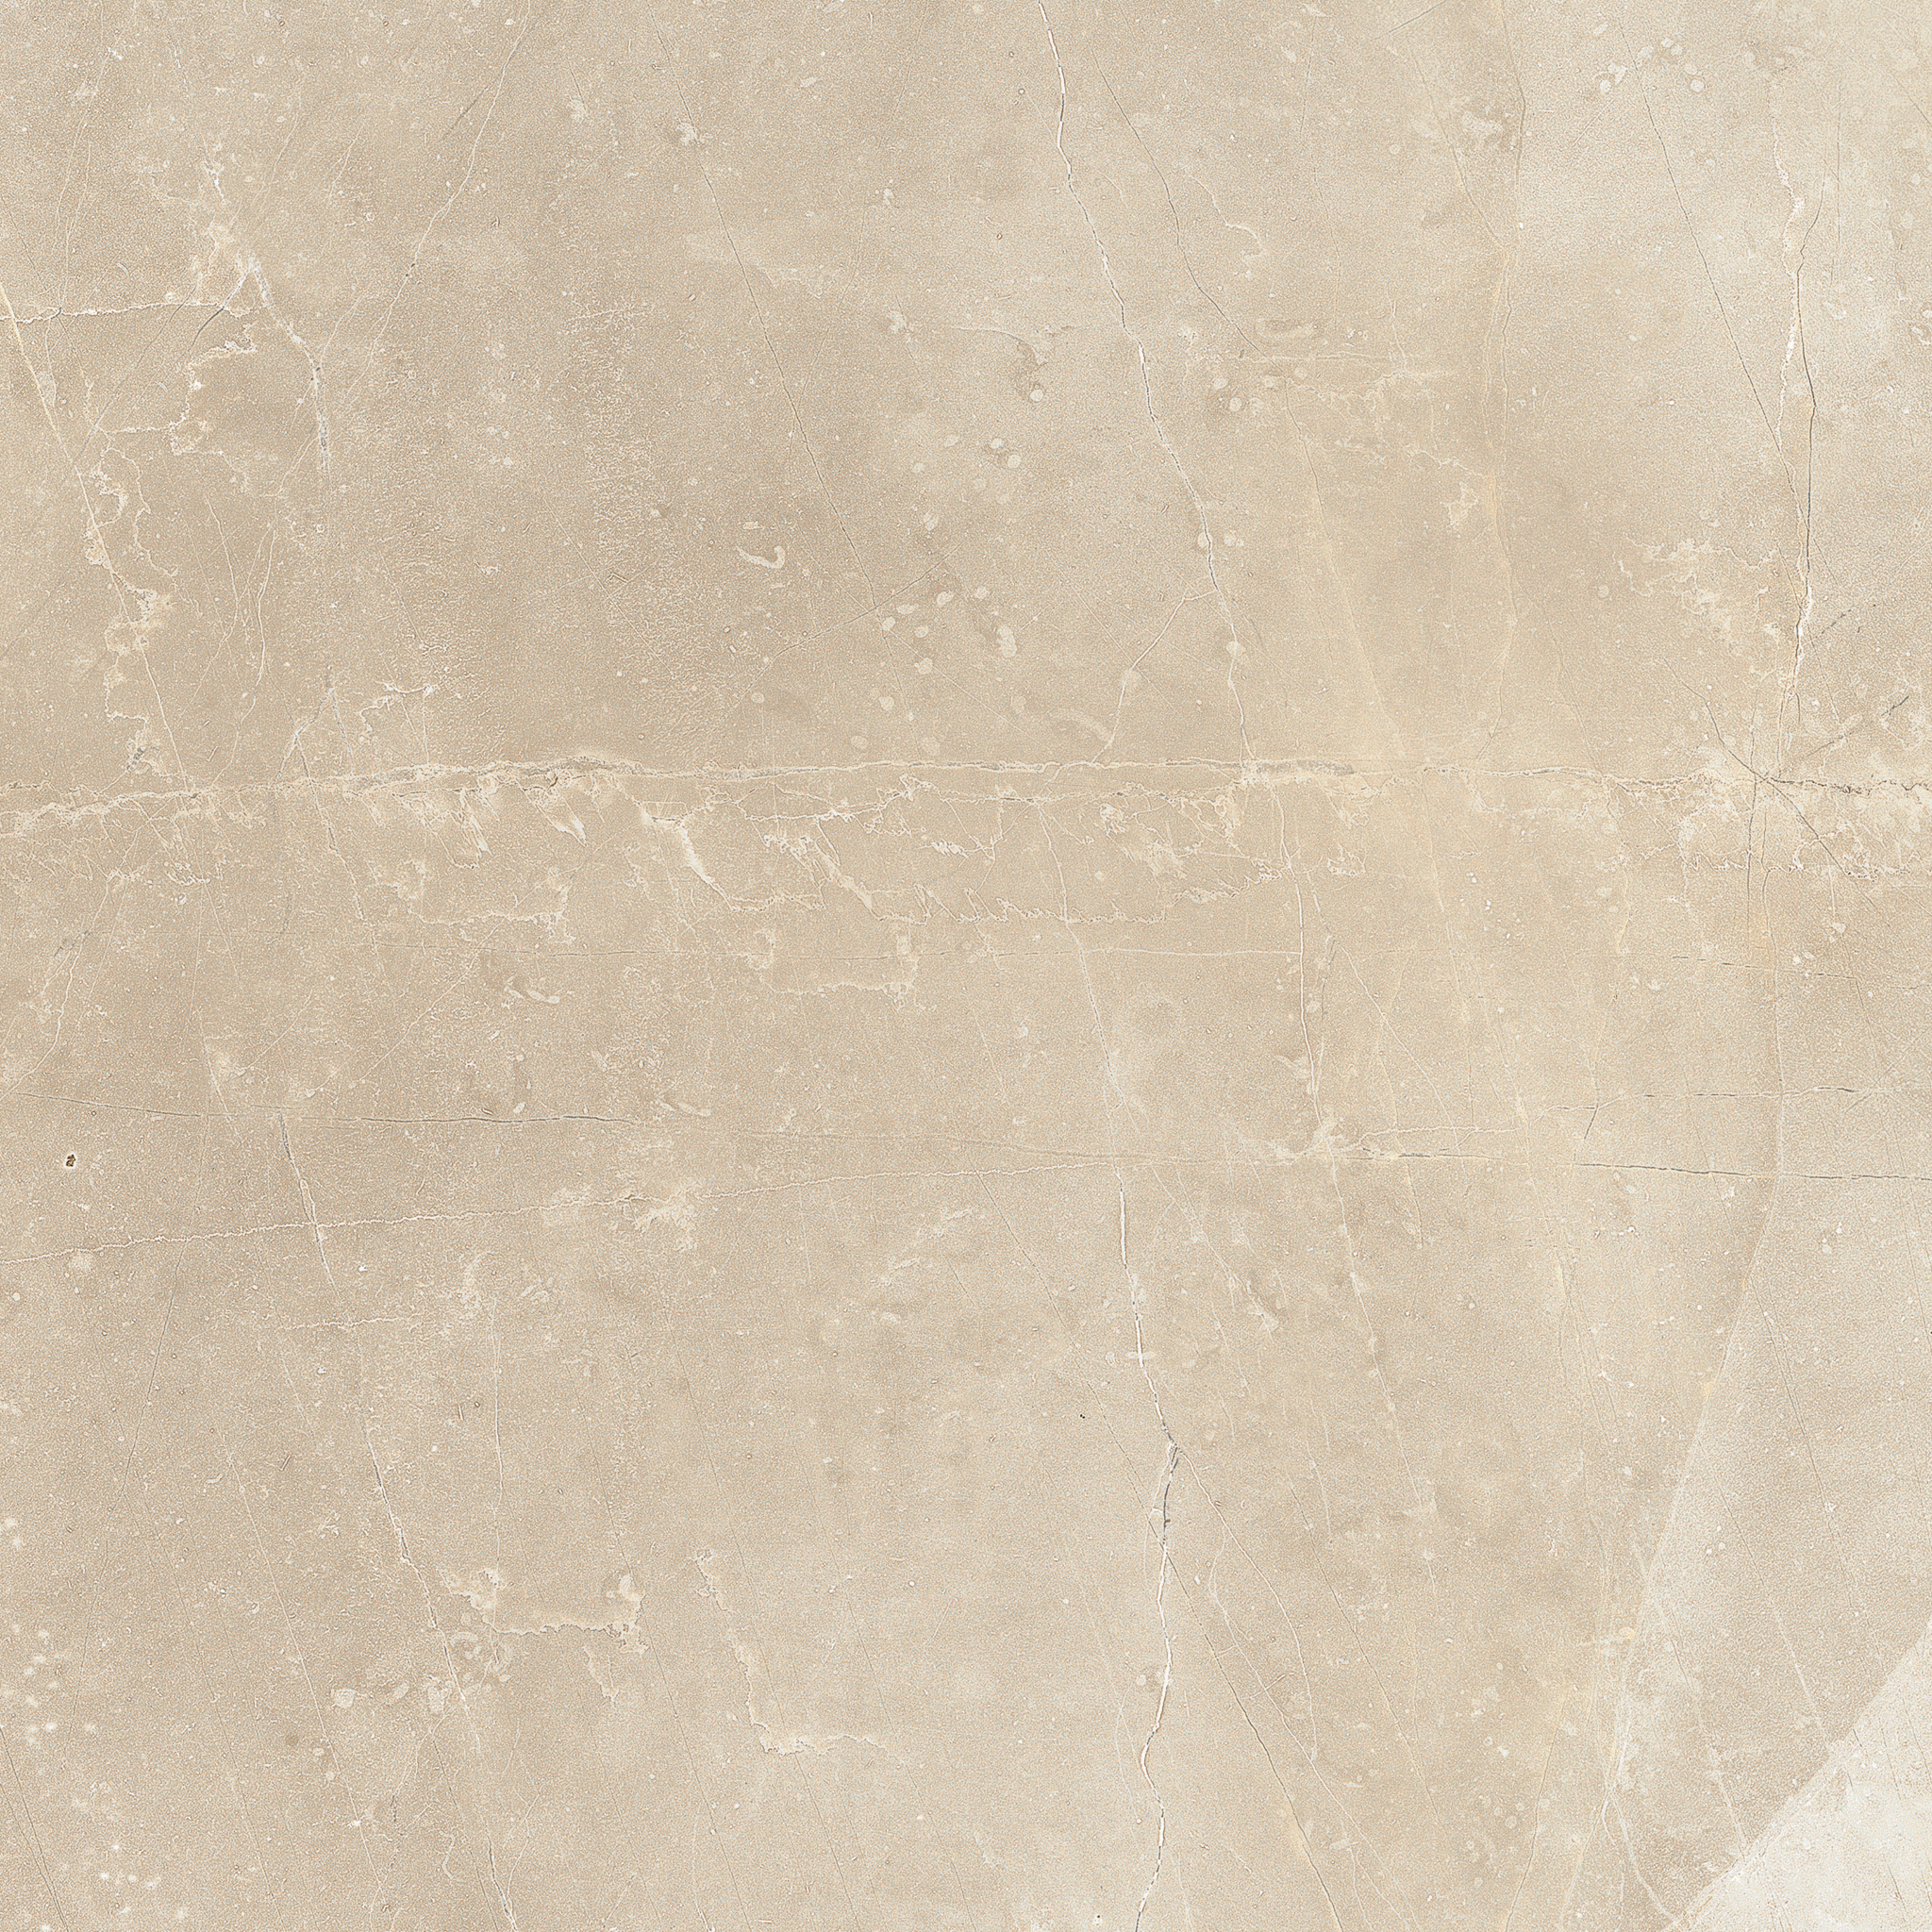 pulpis ivory pattern glazed porcelain field tile from classic anatolia collection distributed by surface group international matte finish pressed edge 12x12 square shape